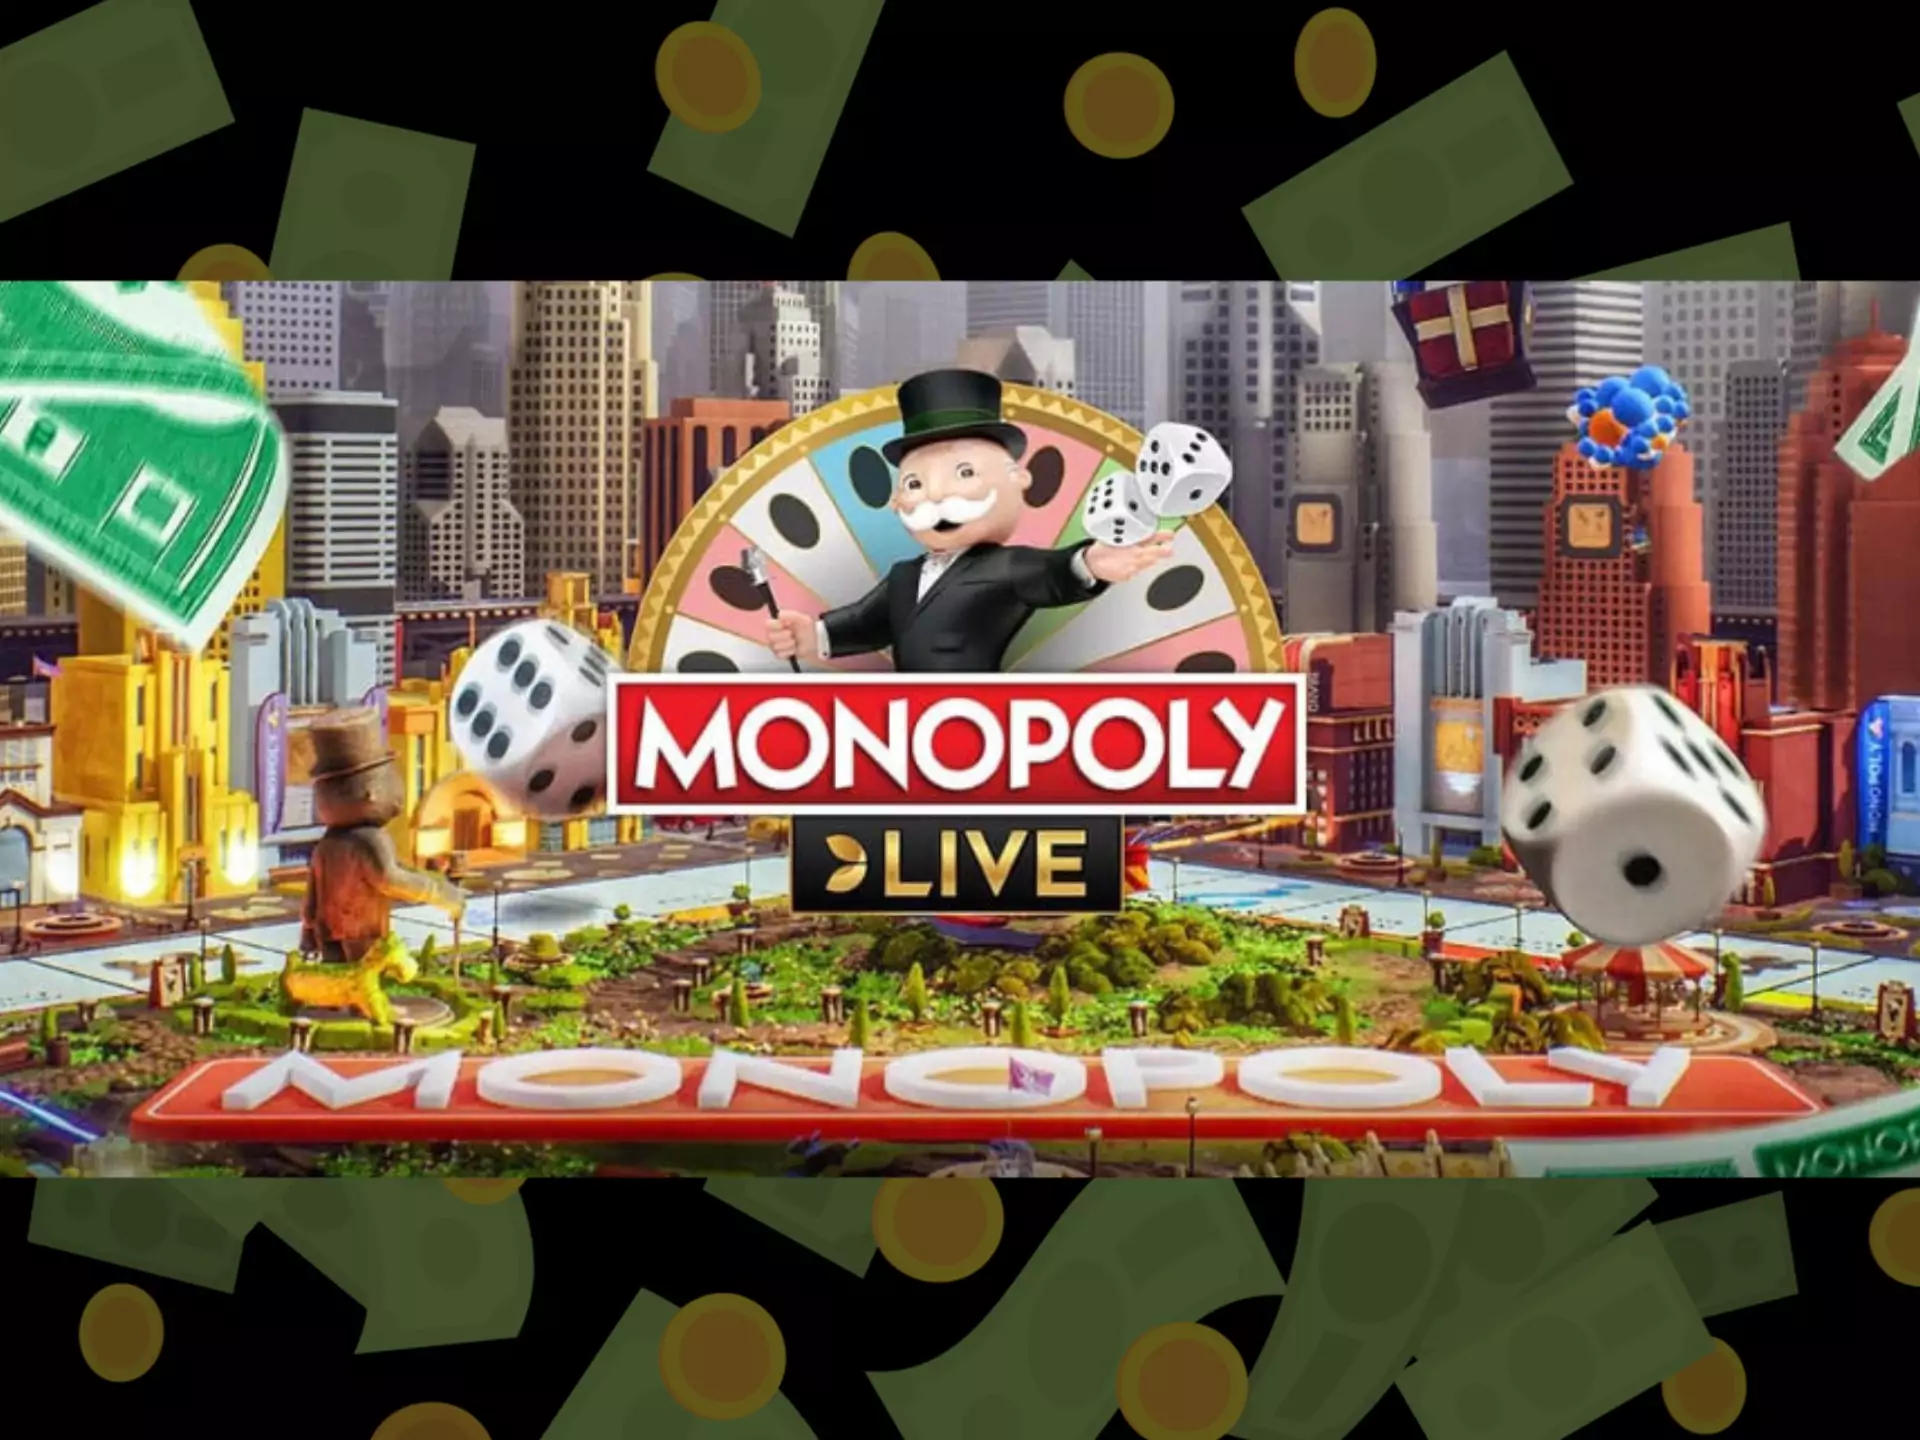 Foolow our advice and win big prizes at an online monopoly.